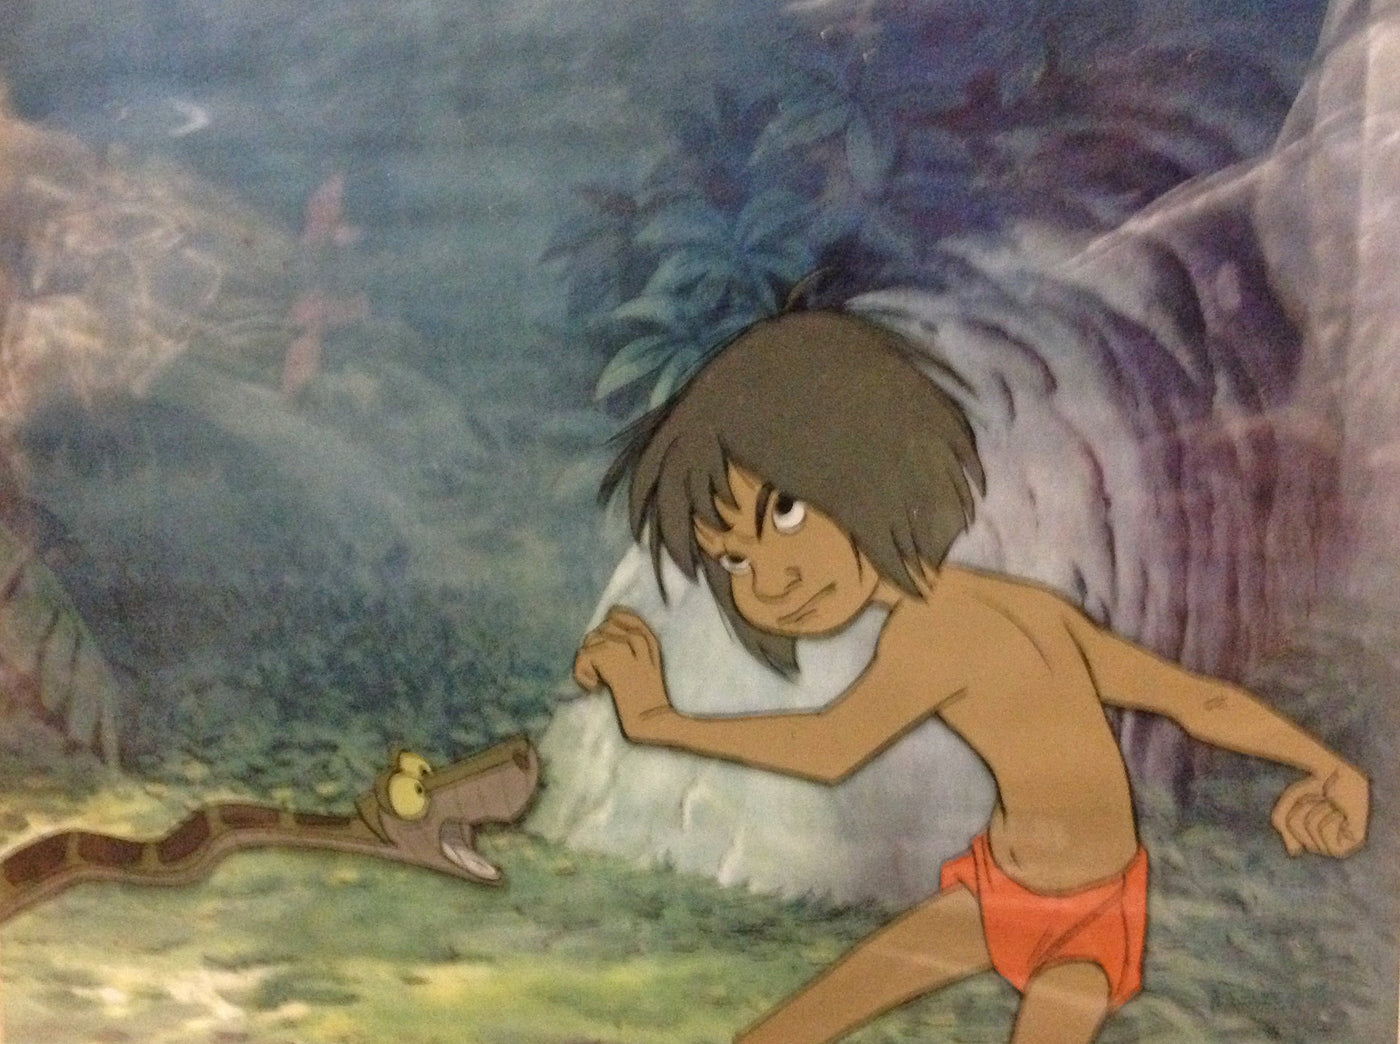 Disney Animation Production Cel featuring Mowgli and Kaa